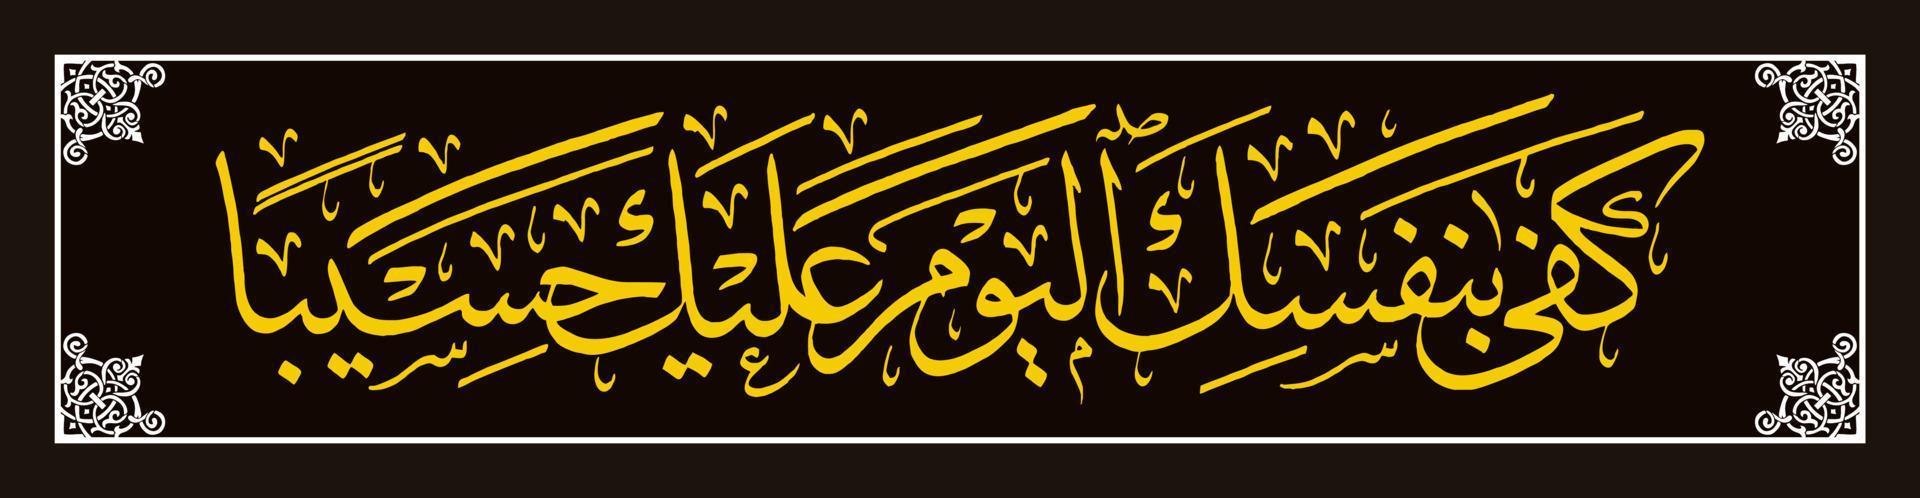 Arabic Calligraphy, Al Qur'an Surah Al Isra 14 , Translate Sufficient yourself today as your counter. vector